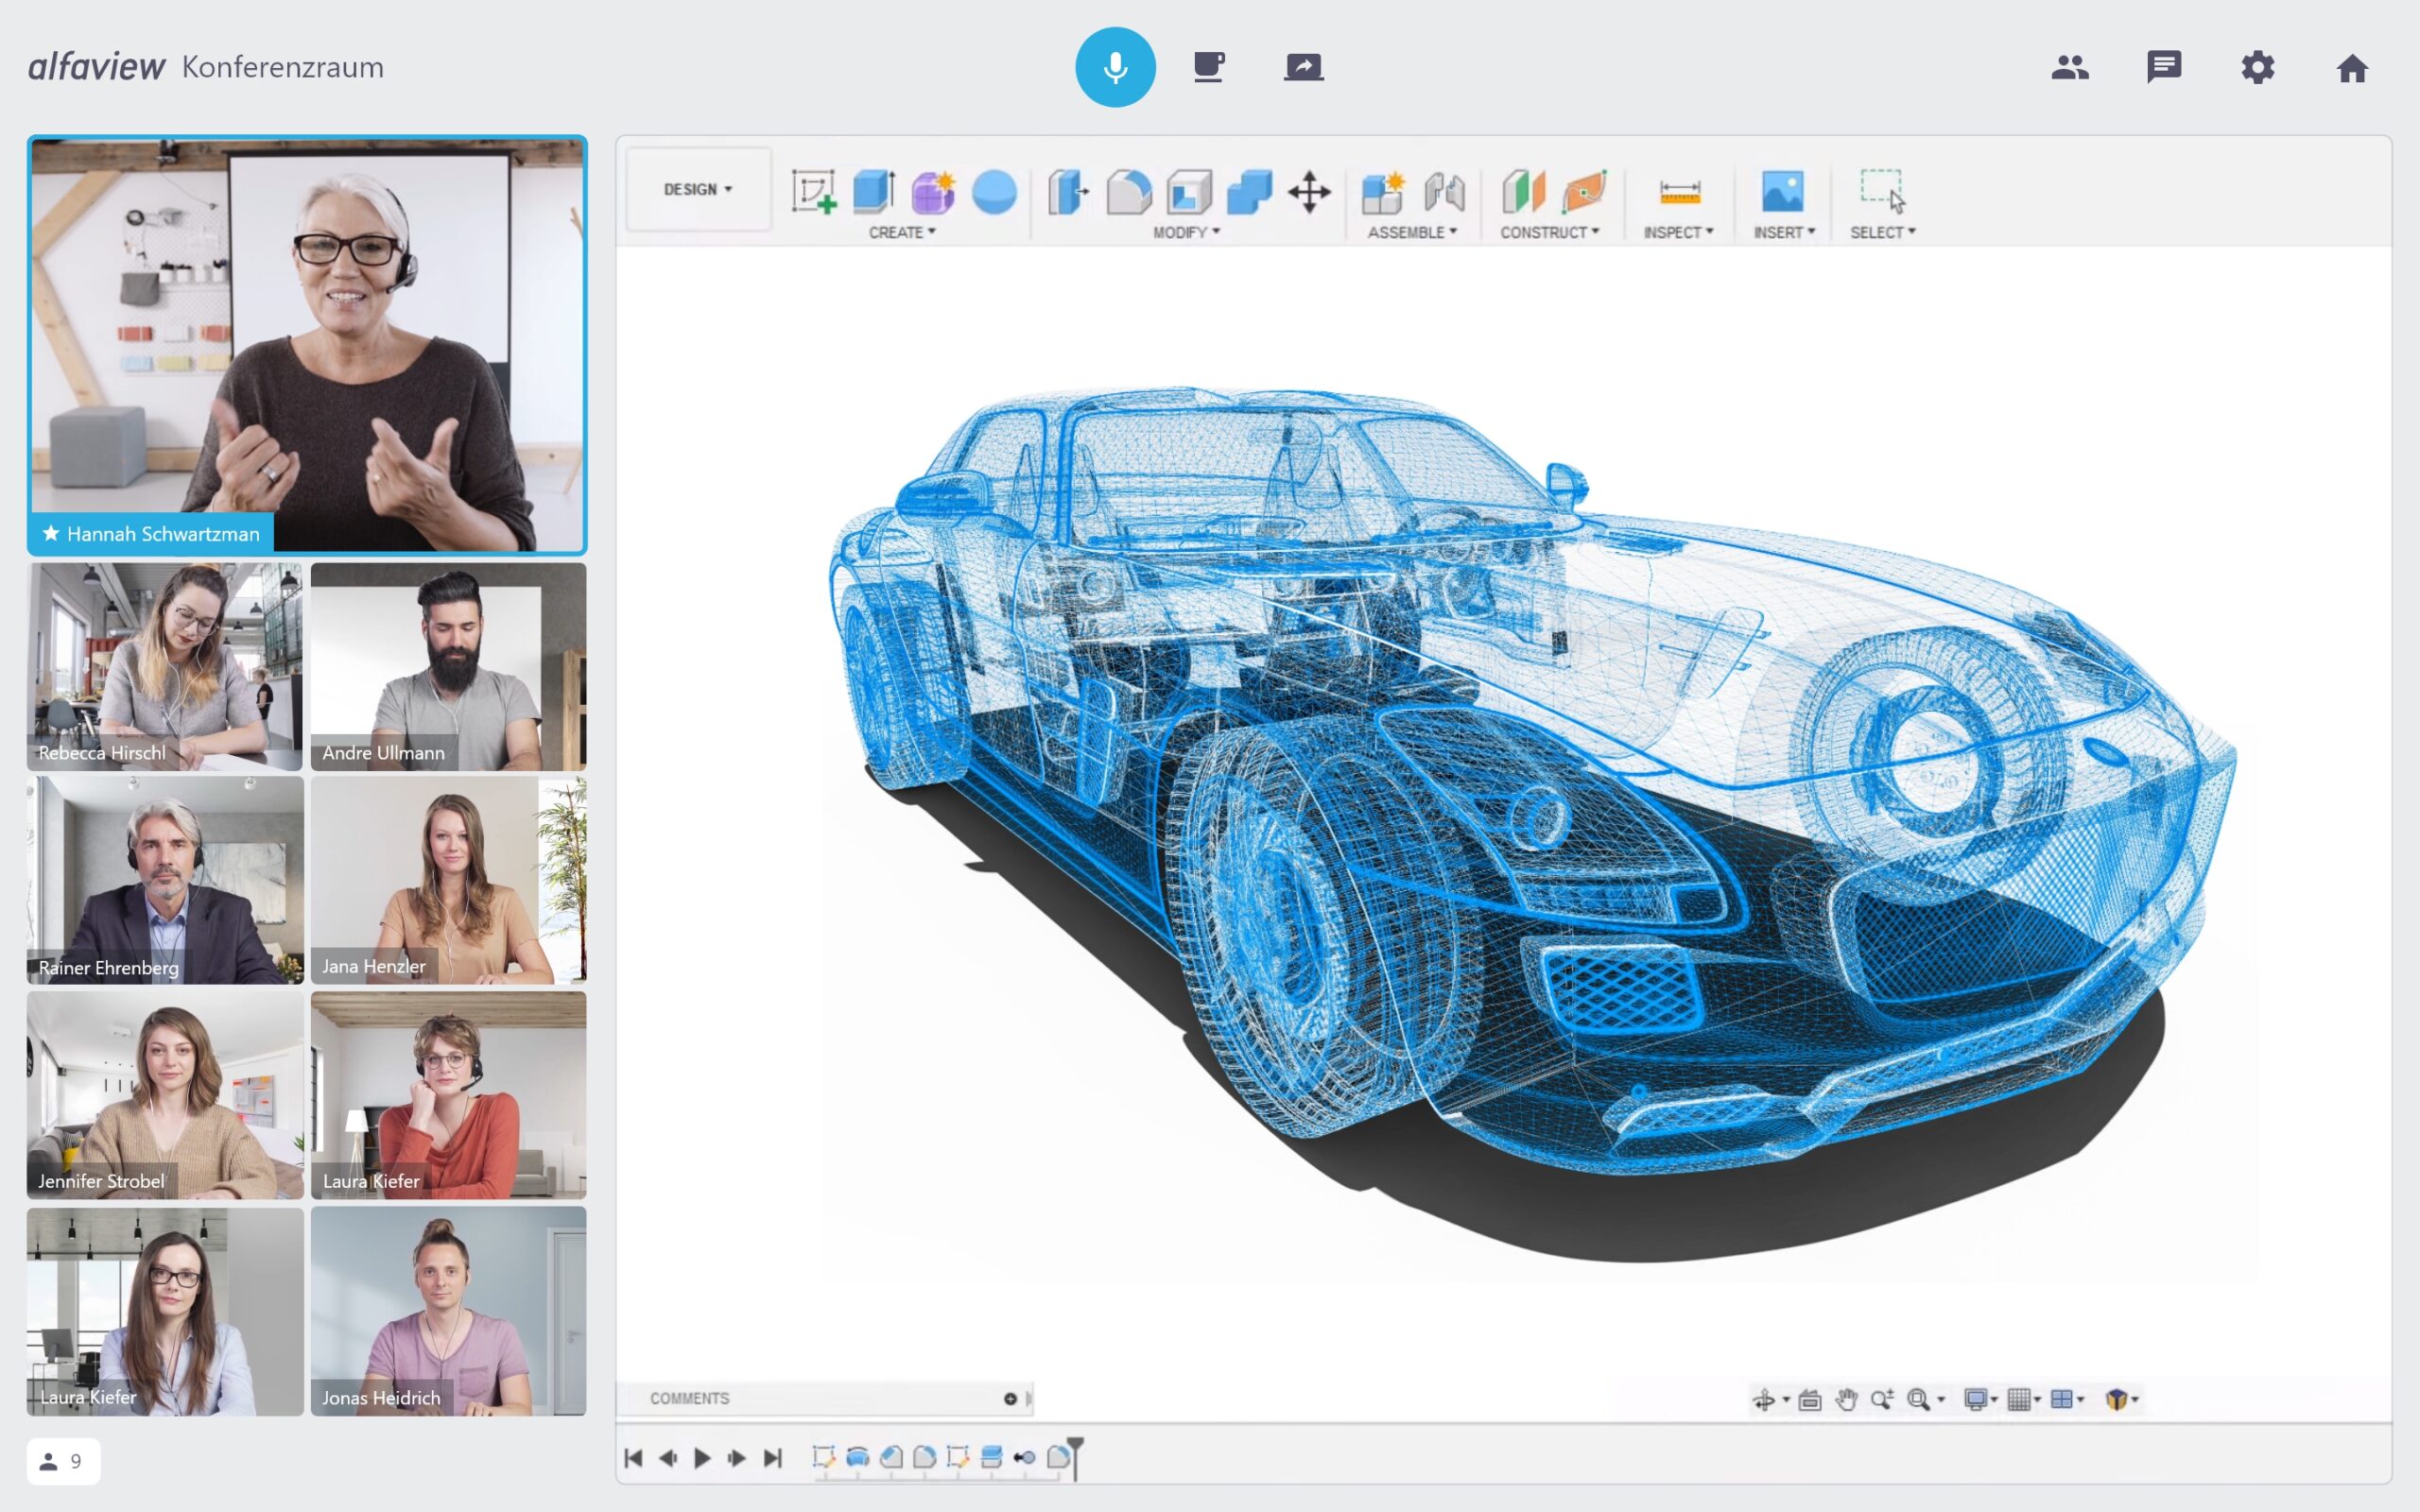 This image shows 8 participants and 1 VIP in an alfaview with an active screen sharing showing a blue CAD model of a car.